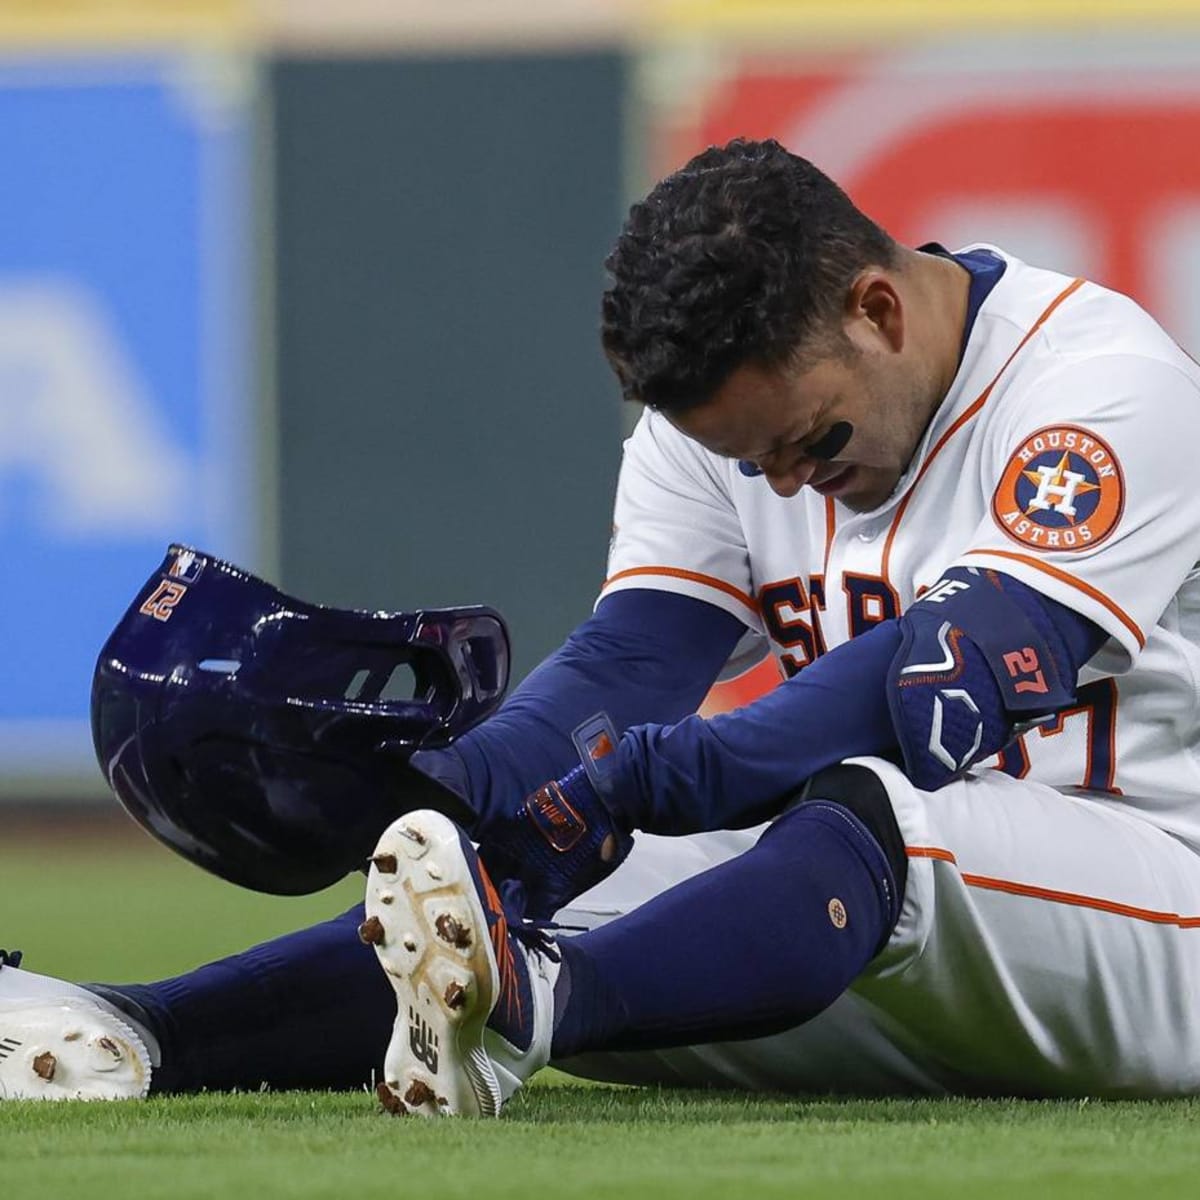 Despite age and injury, José Altuve is flourishing at the plate